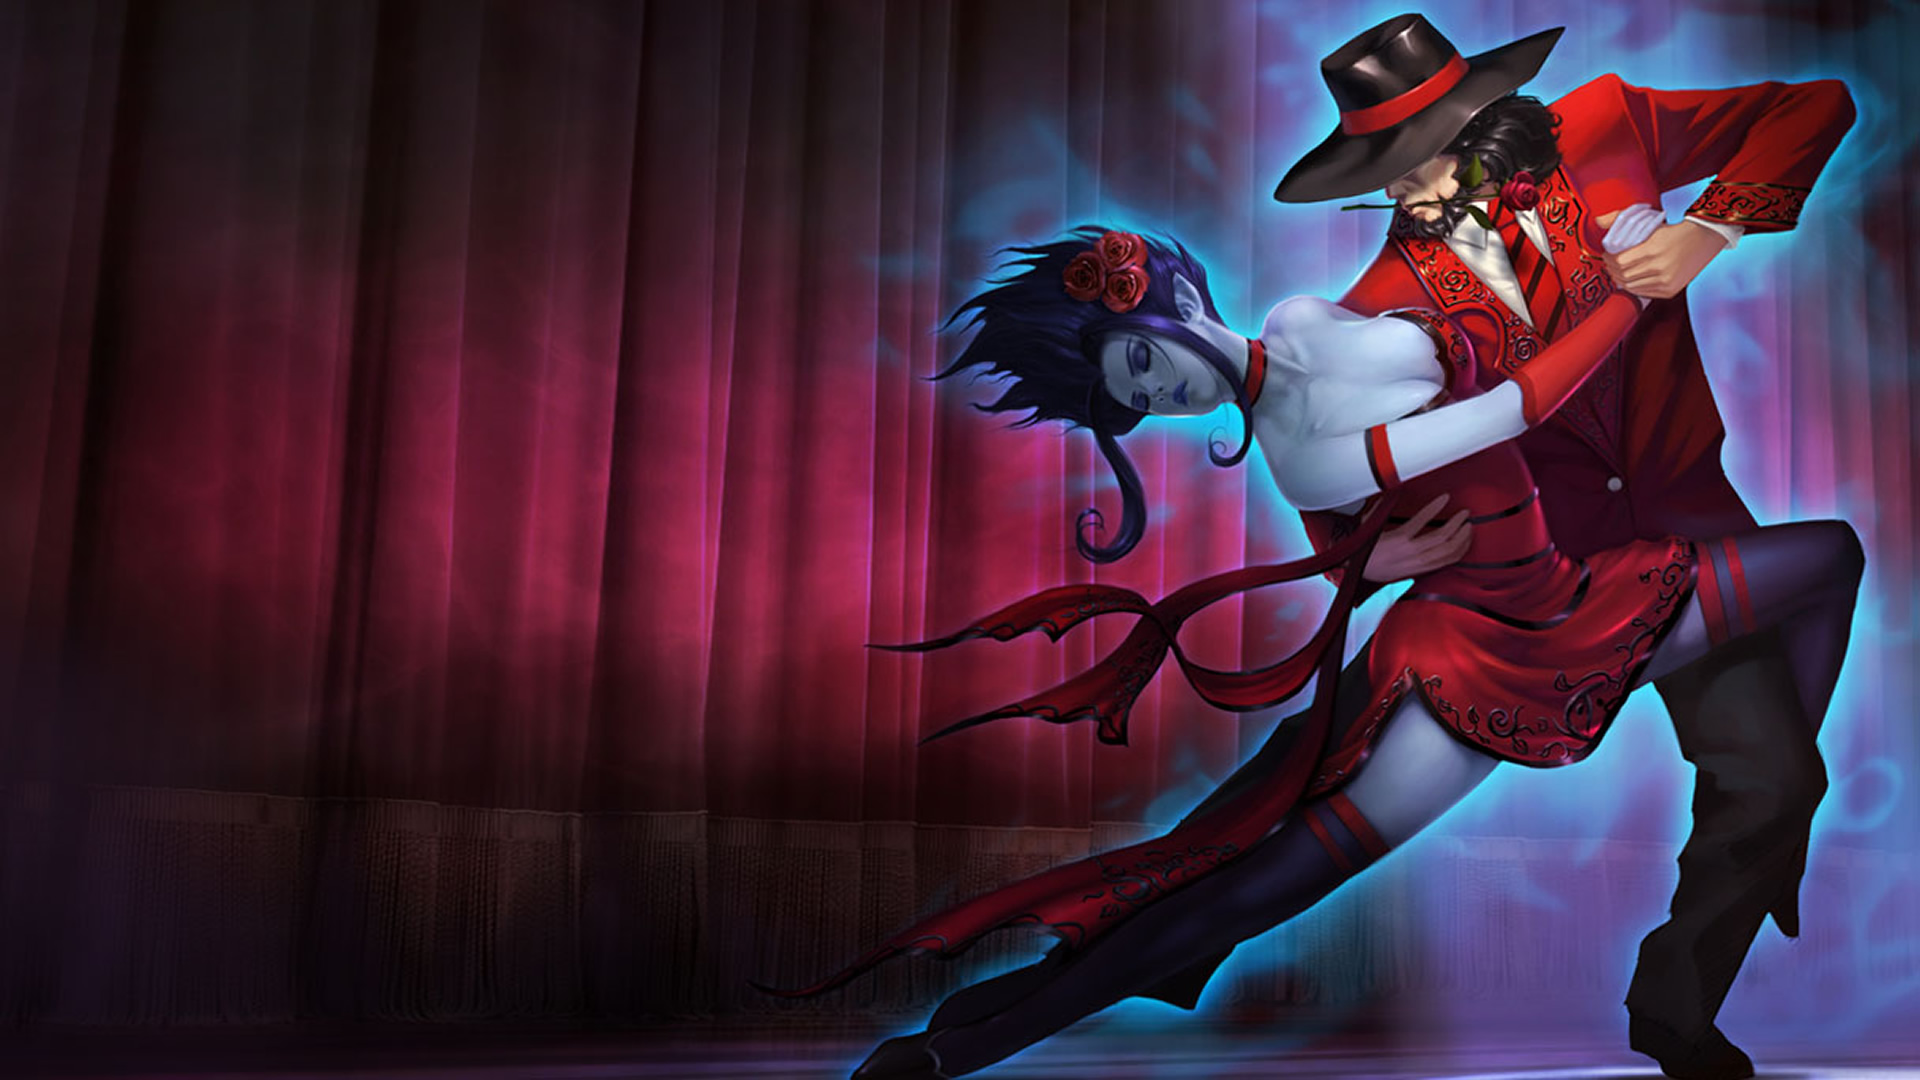 Tango Twisted Fate Wallpaper   Download Free Gaming Wallpapers